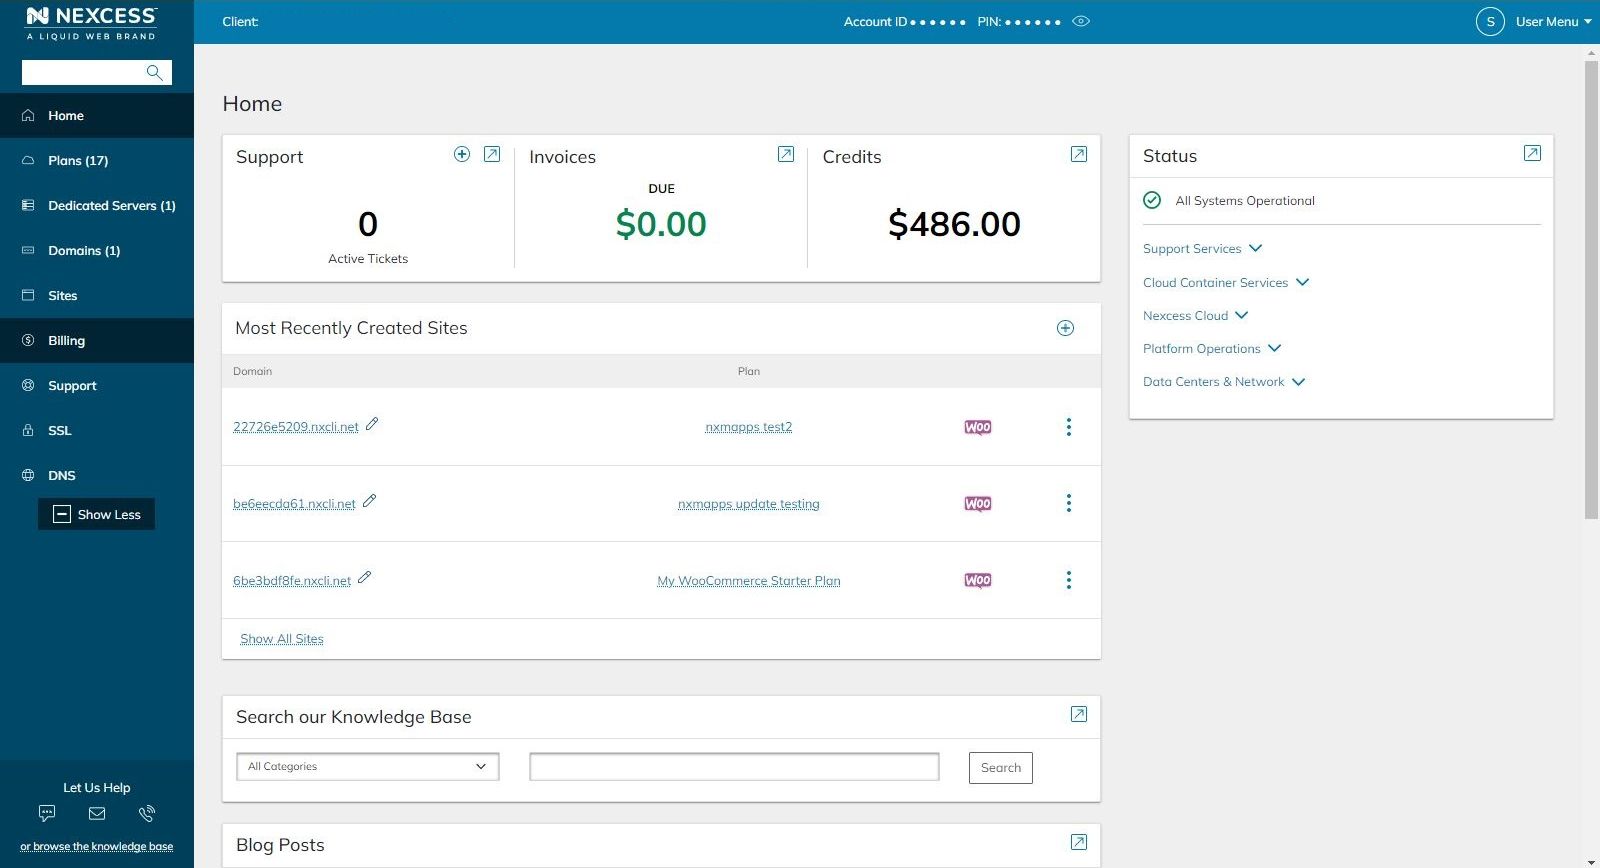 From the main Nexcess Client Portal page, you’ll be able to access the Billing section.